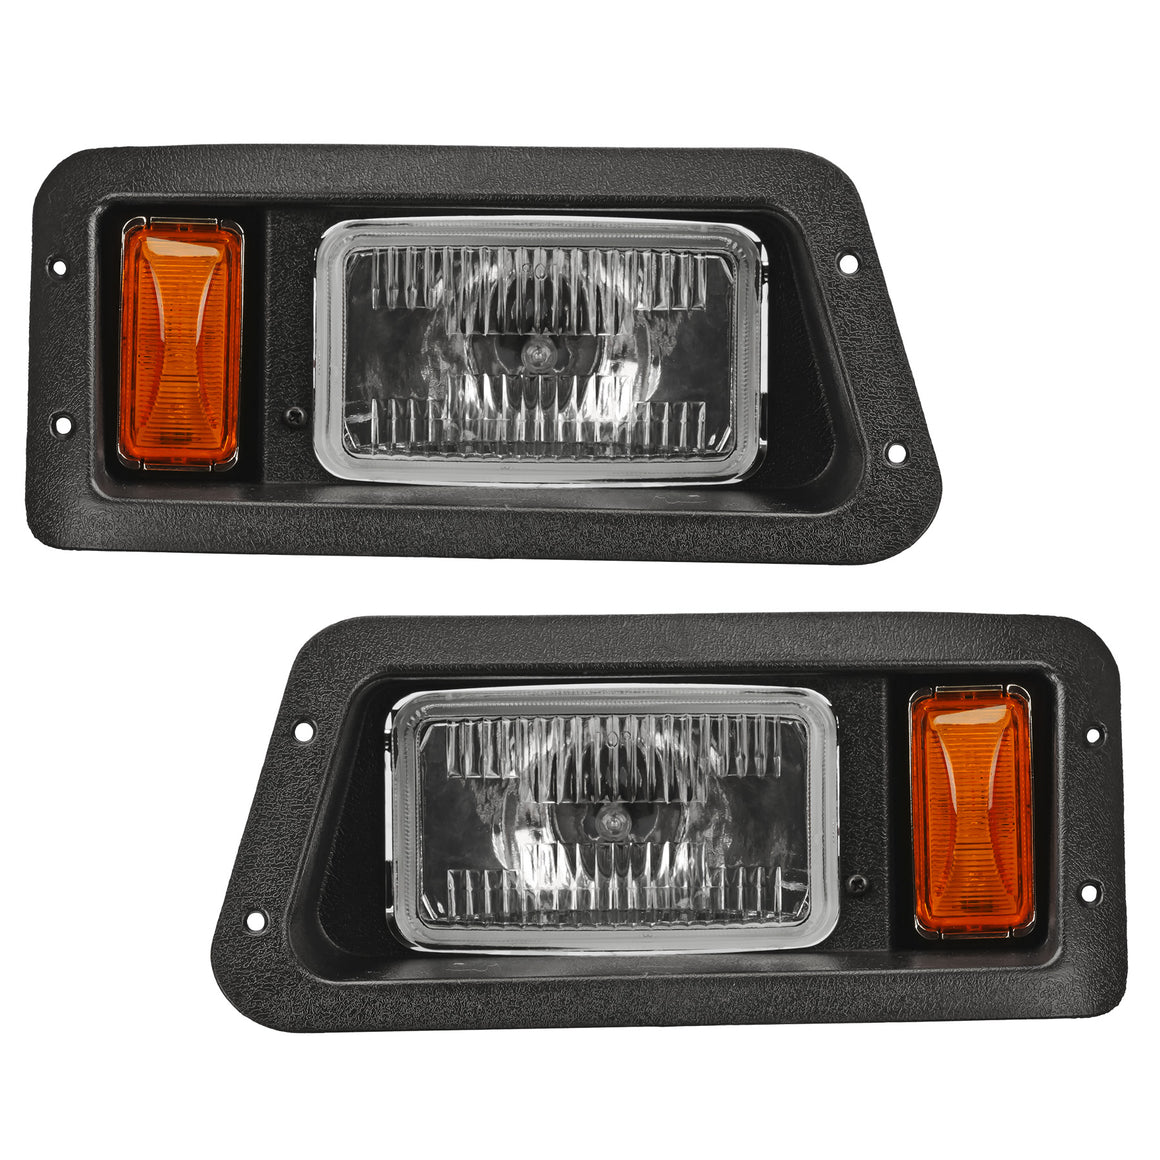 Route 66 Headlights for Yamaha G14-G22